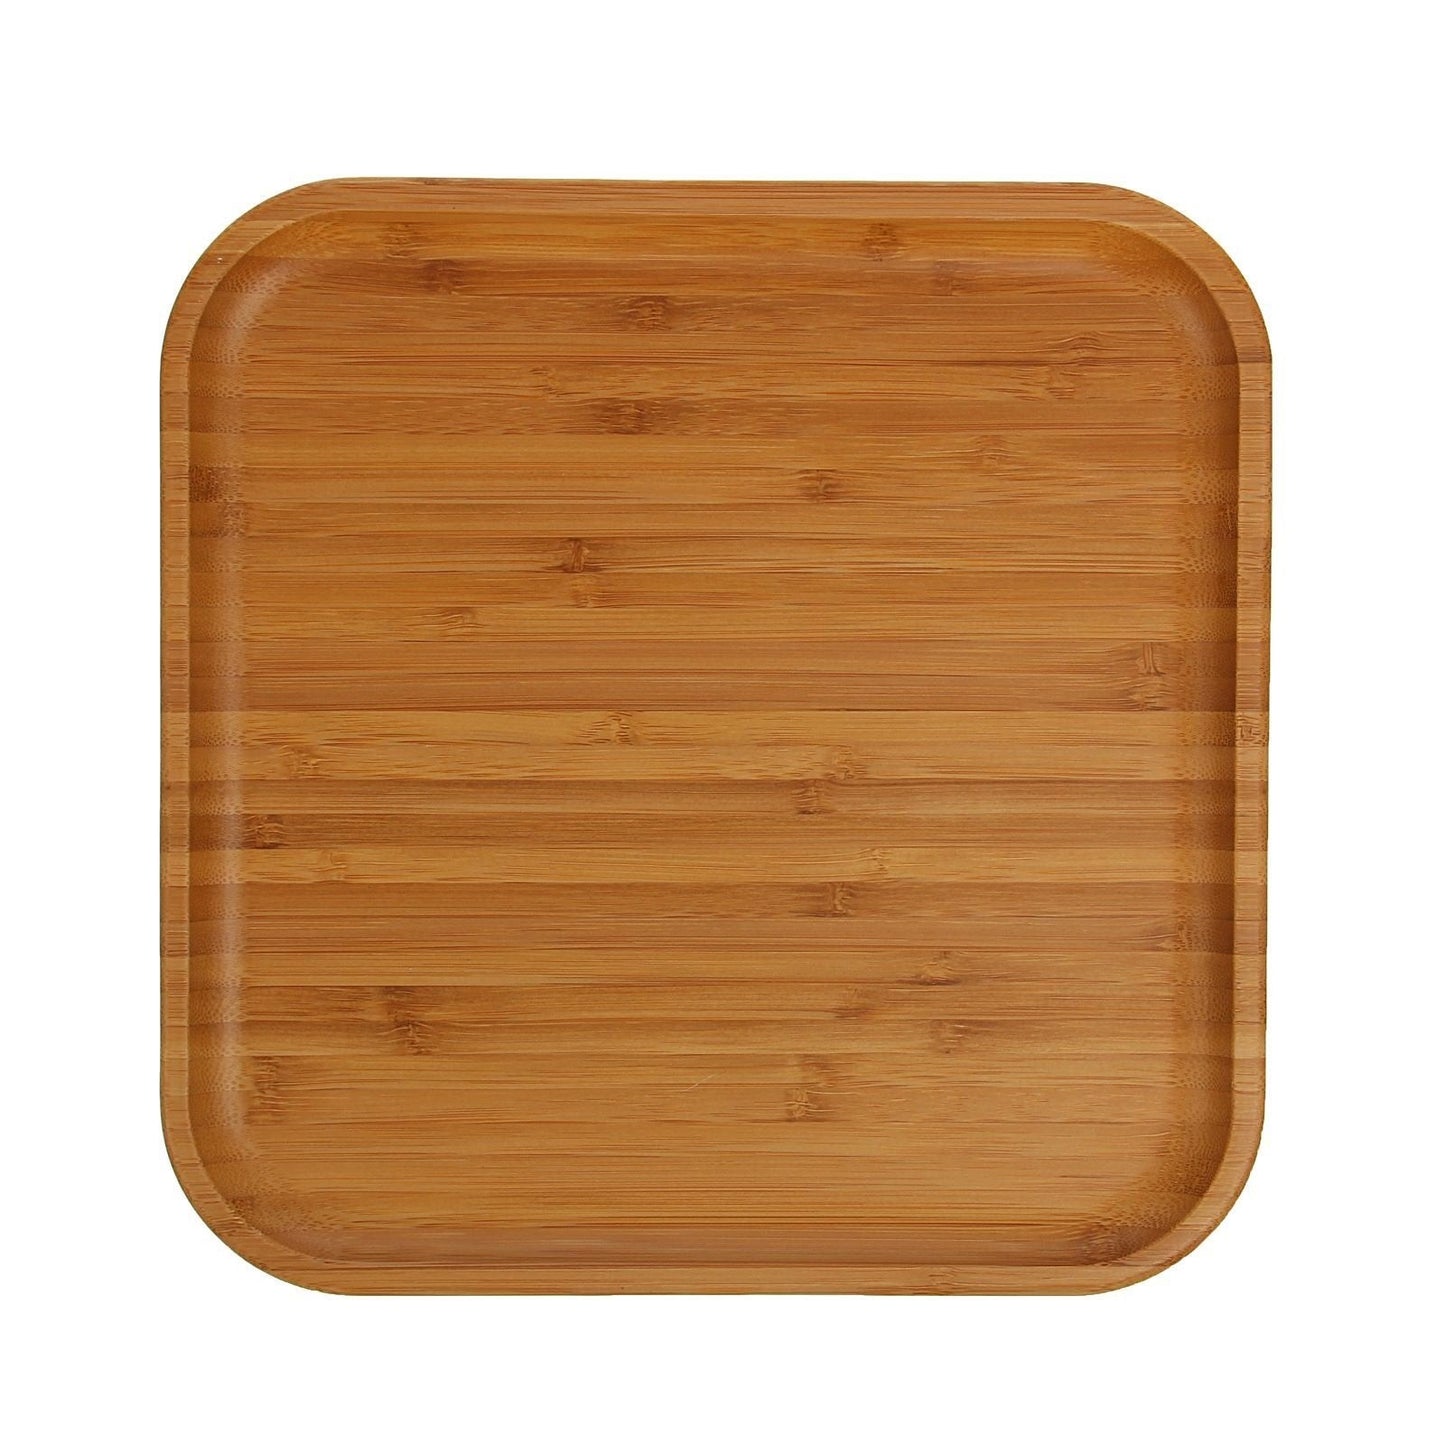 Bamboo Square Plate 11" inch X 11" inch -1